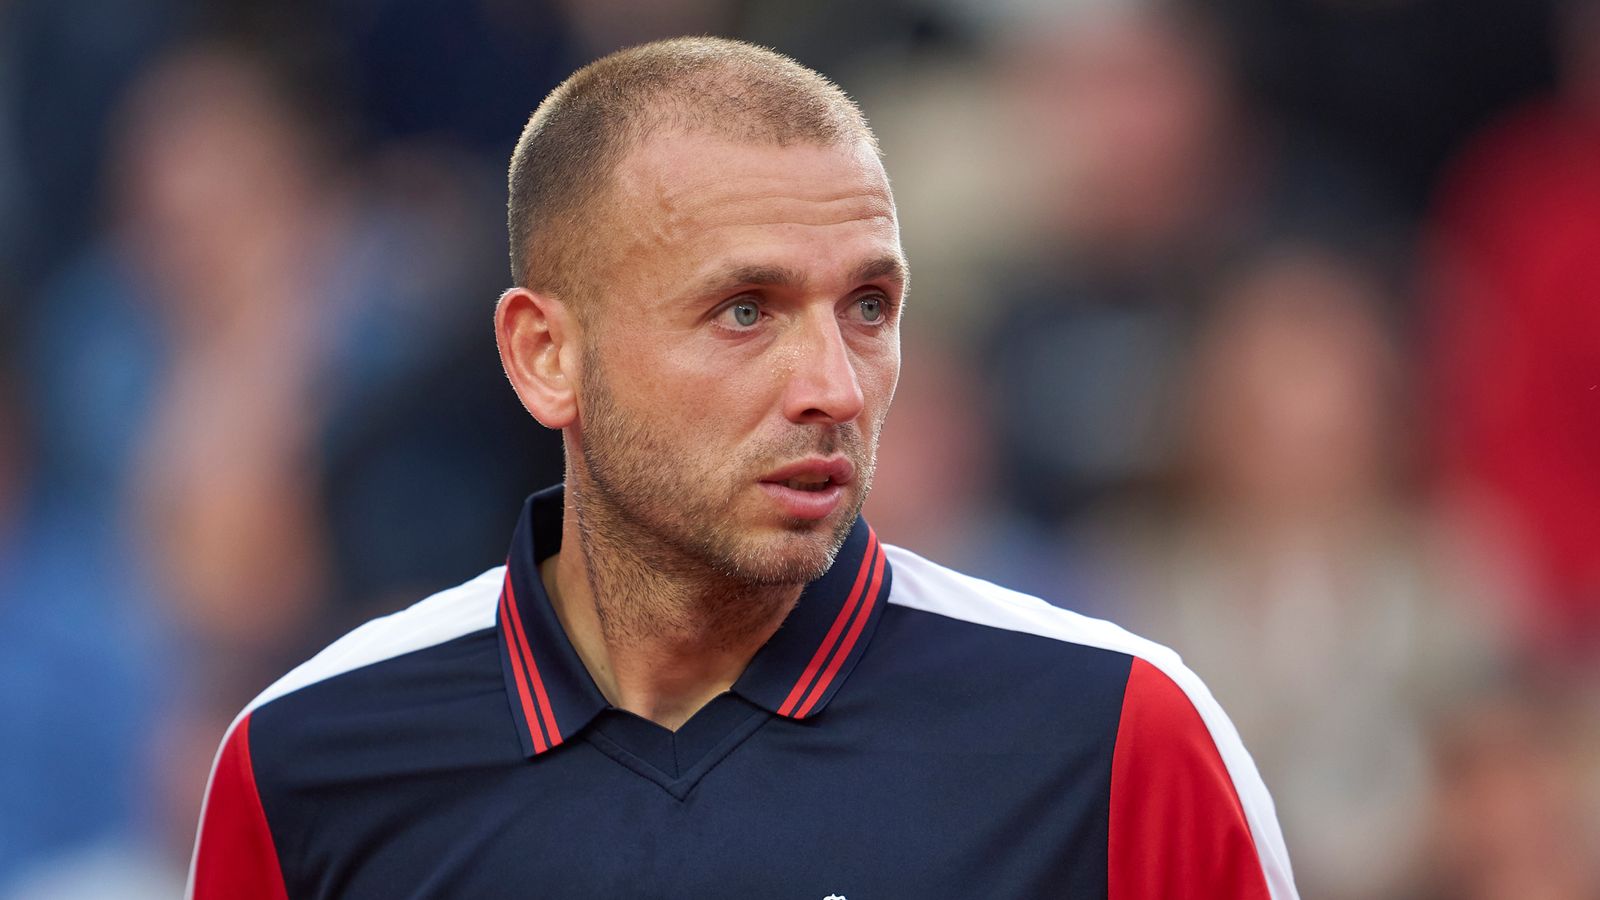 Dan Evans and Katie Boulter suffers first-round French Open defeats at Roland Garros | Tennis News